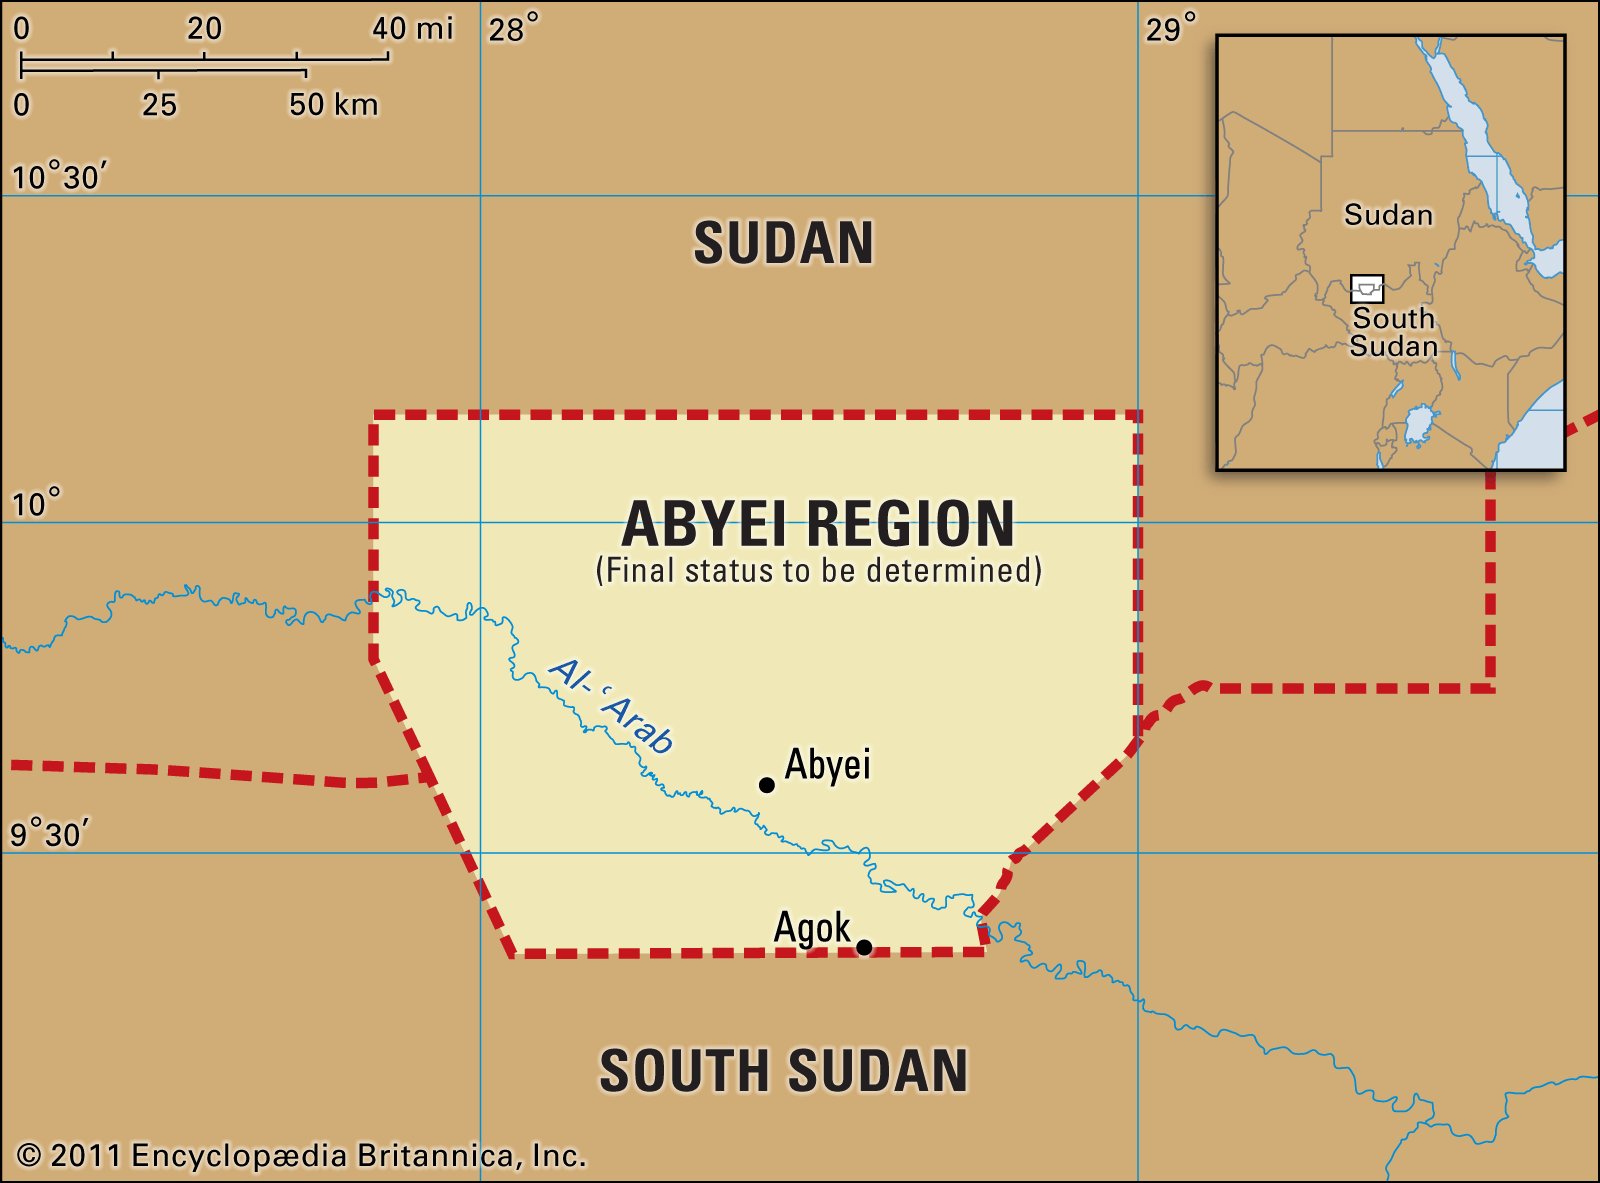 UN envoy concerned by impact of Sudanese unrests on Abyei issue